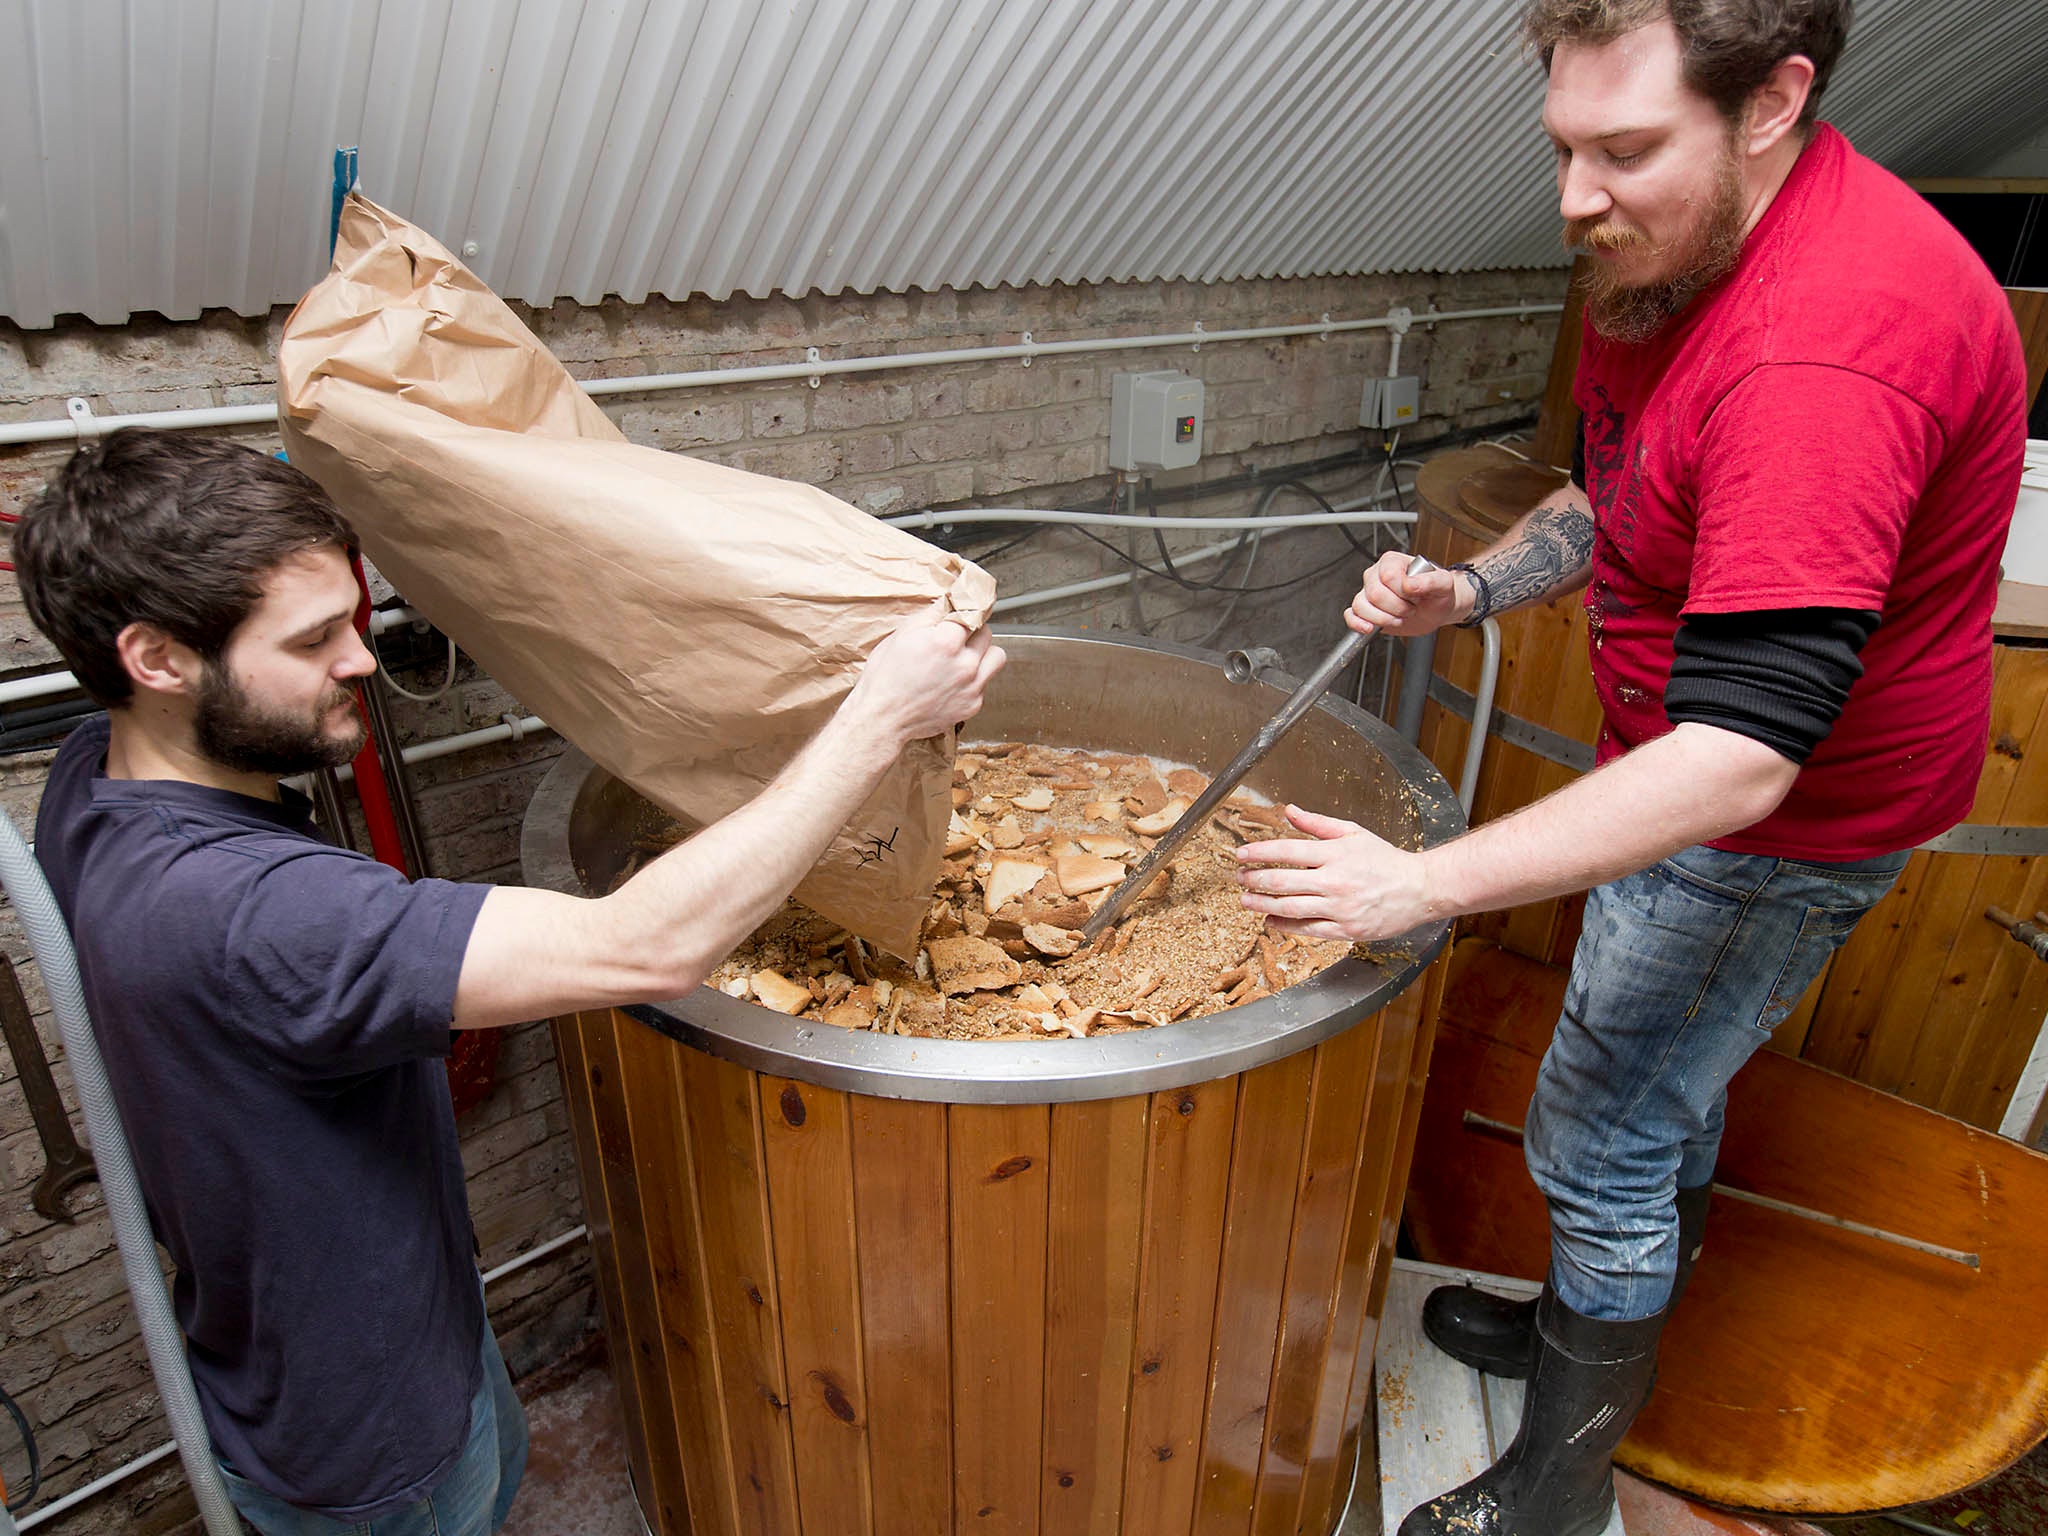 Toast Ale makes use of some of the 46 million slices of bread thrown away each year to brew craft beer